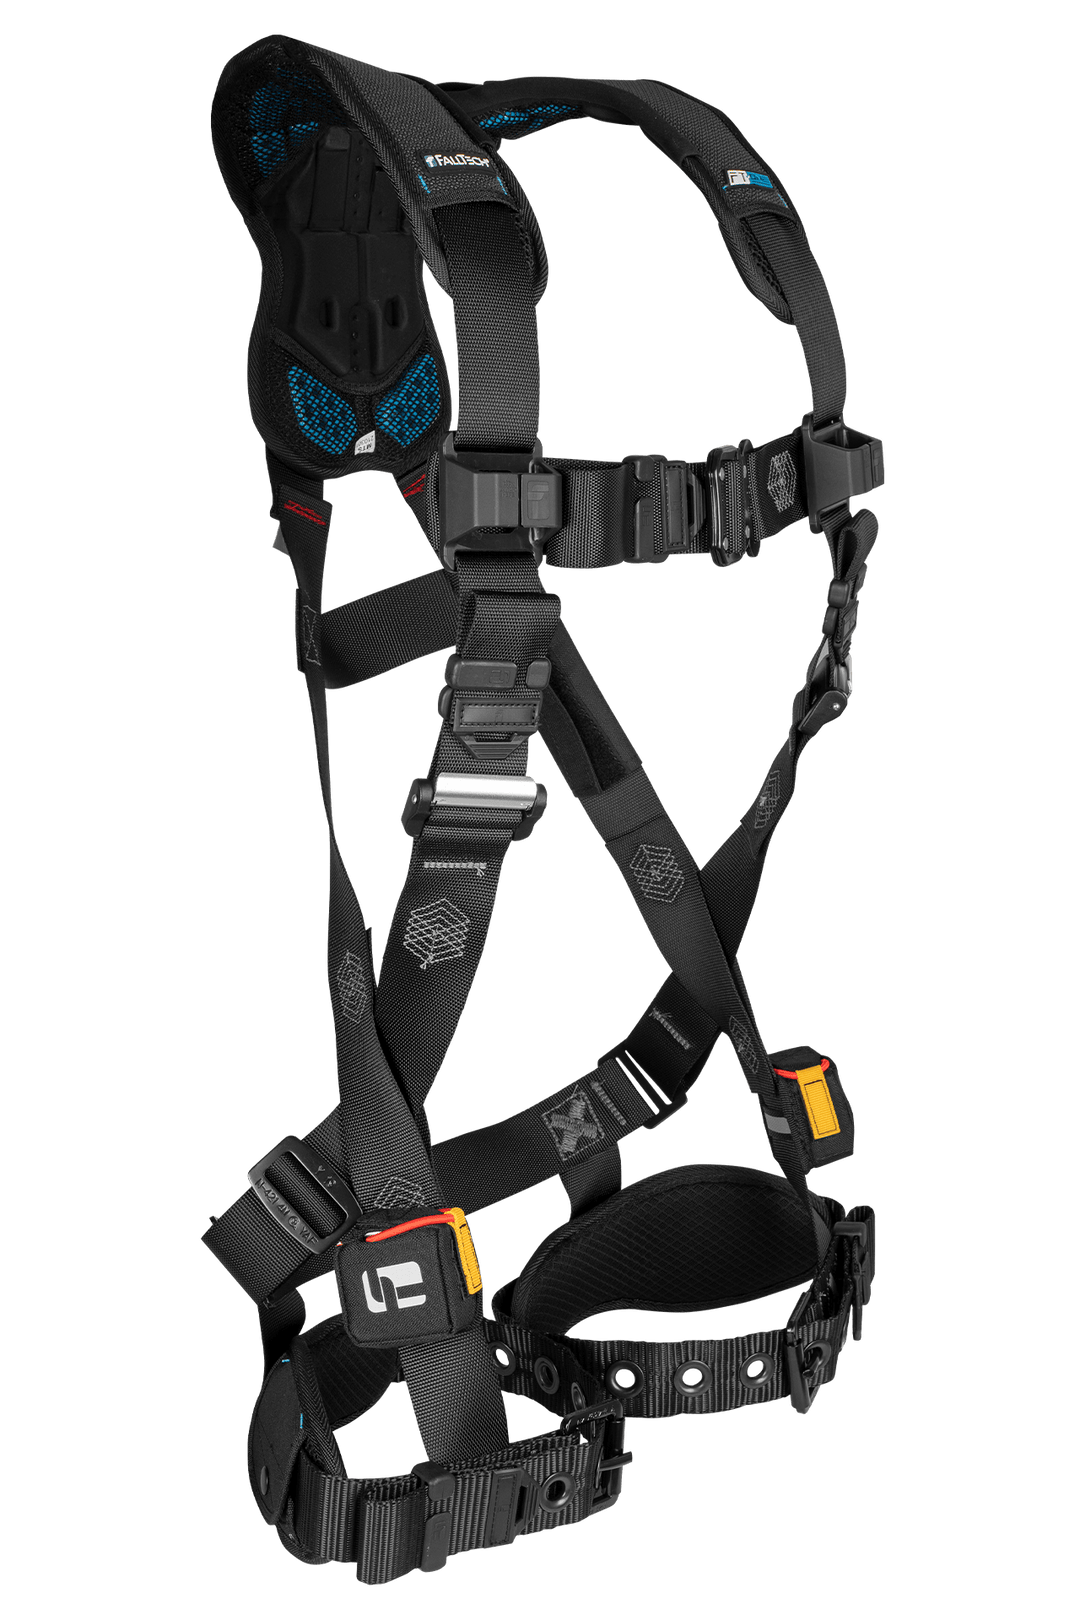 FALLTECH FT-ONE FIT™ 1D Standard Non-Belted Women's Full Body Harness, Tongue Buckle Leg Adjustments